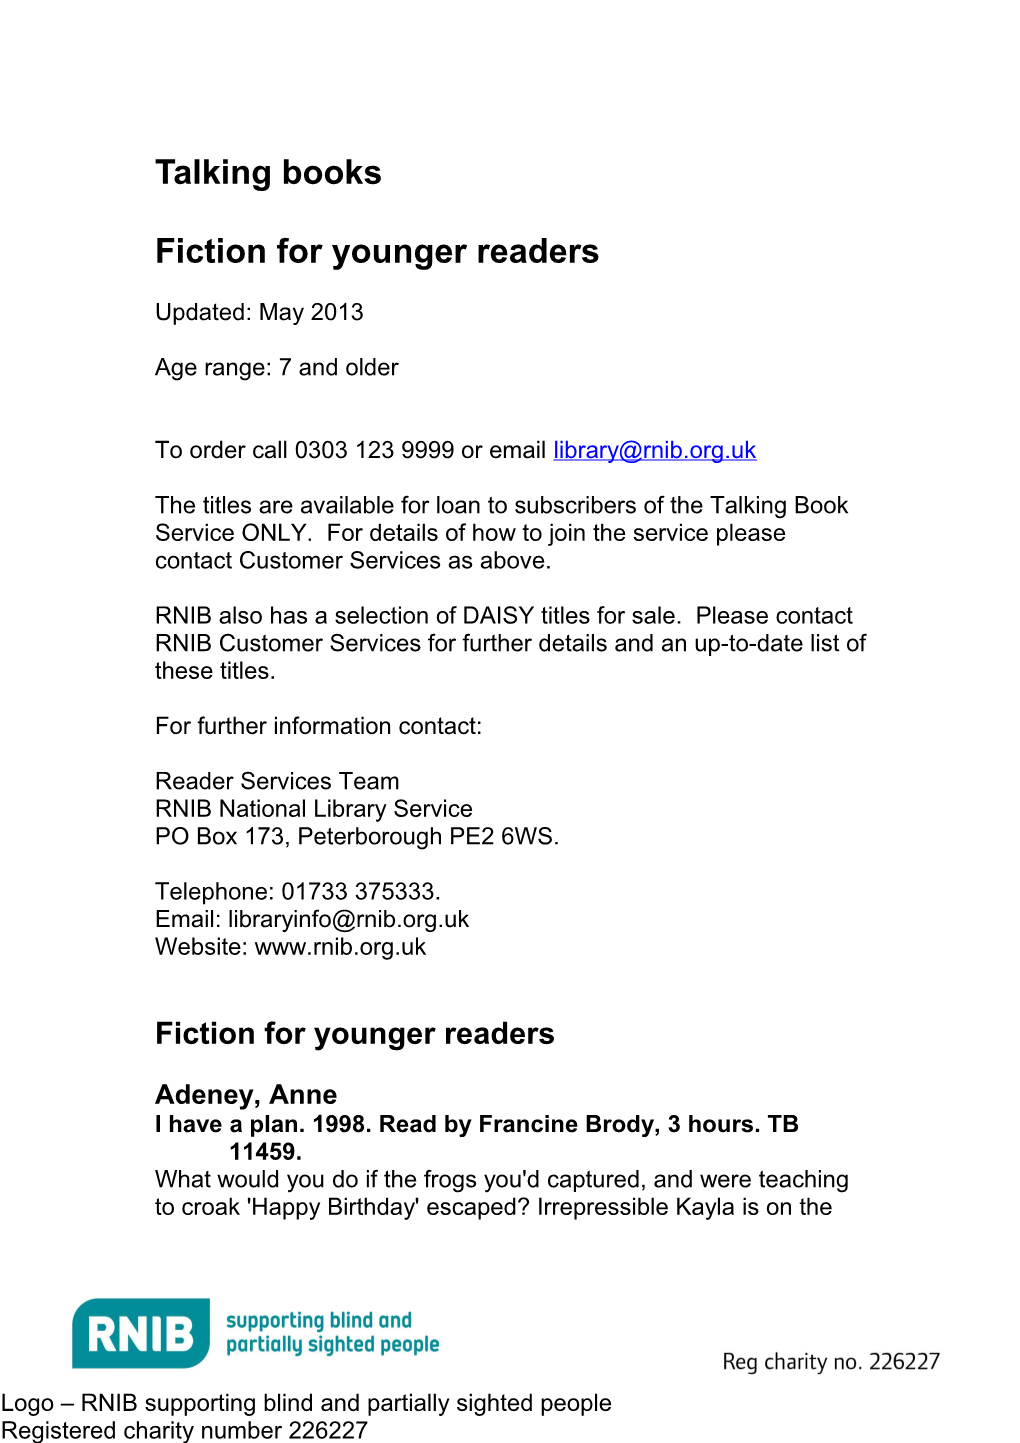 Fiction for Ages 7 and Older on Talking Book (Word, 200KB)